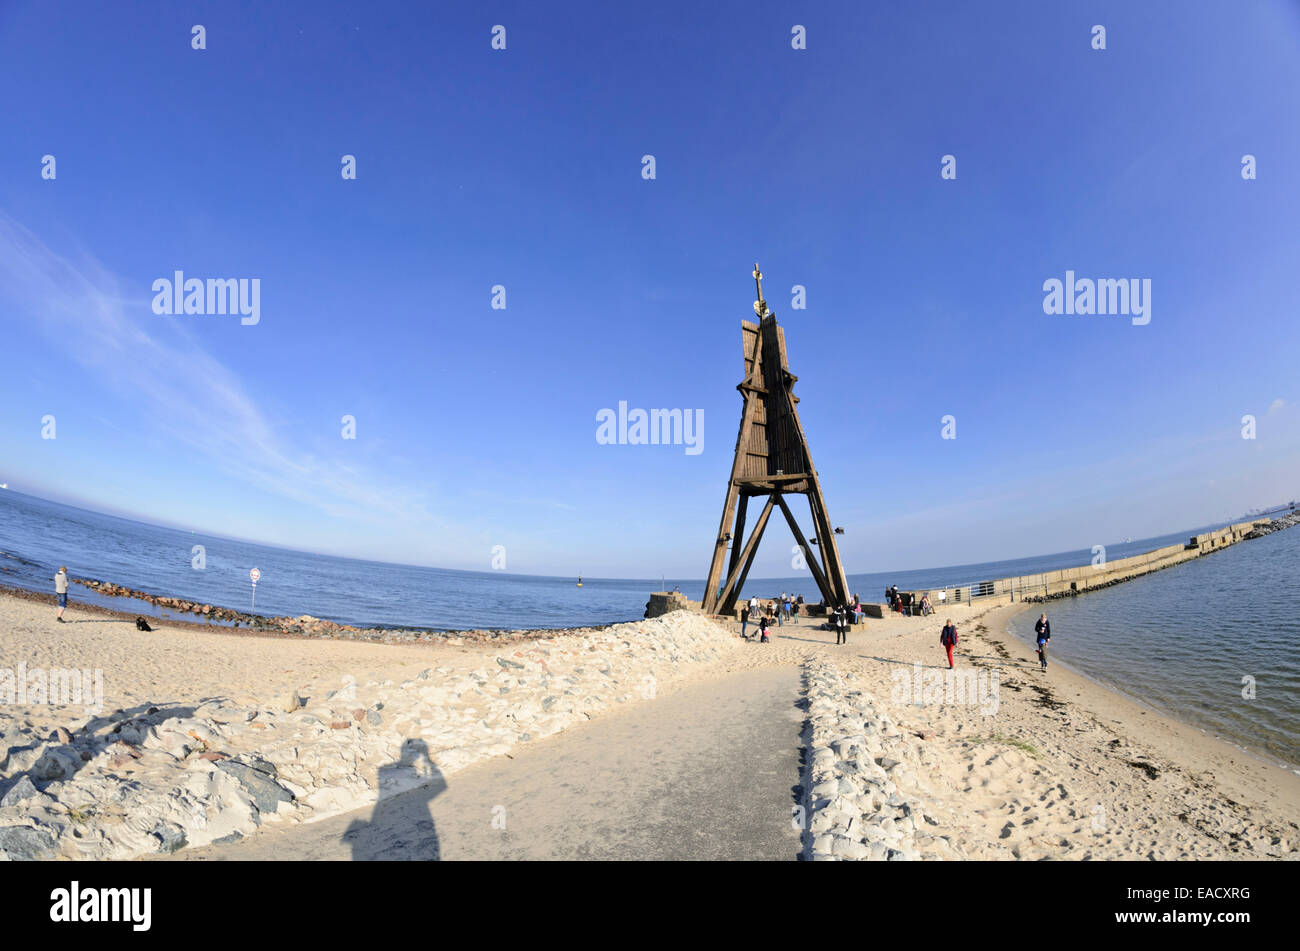 Kugelbake at Elbe River Mouth, Cuxhaven, Germany Stock Photo